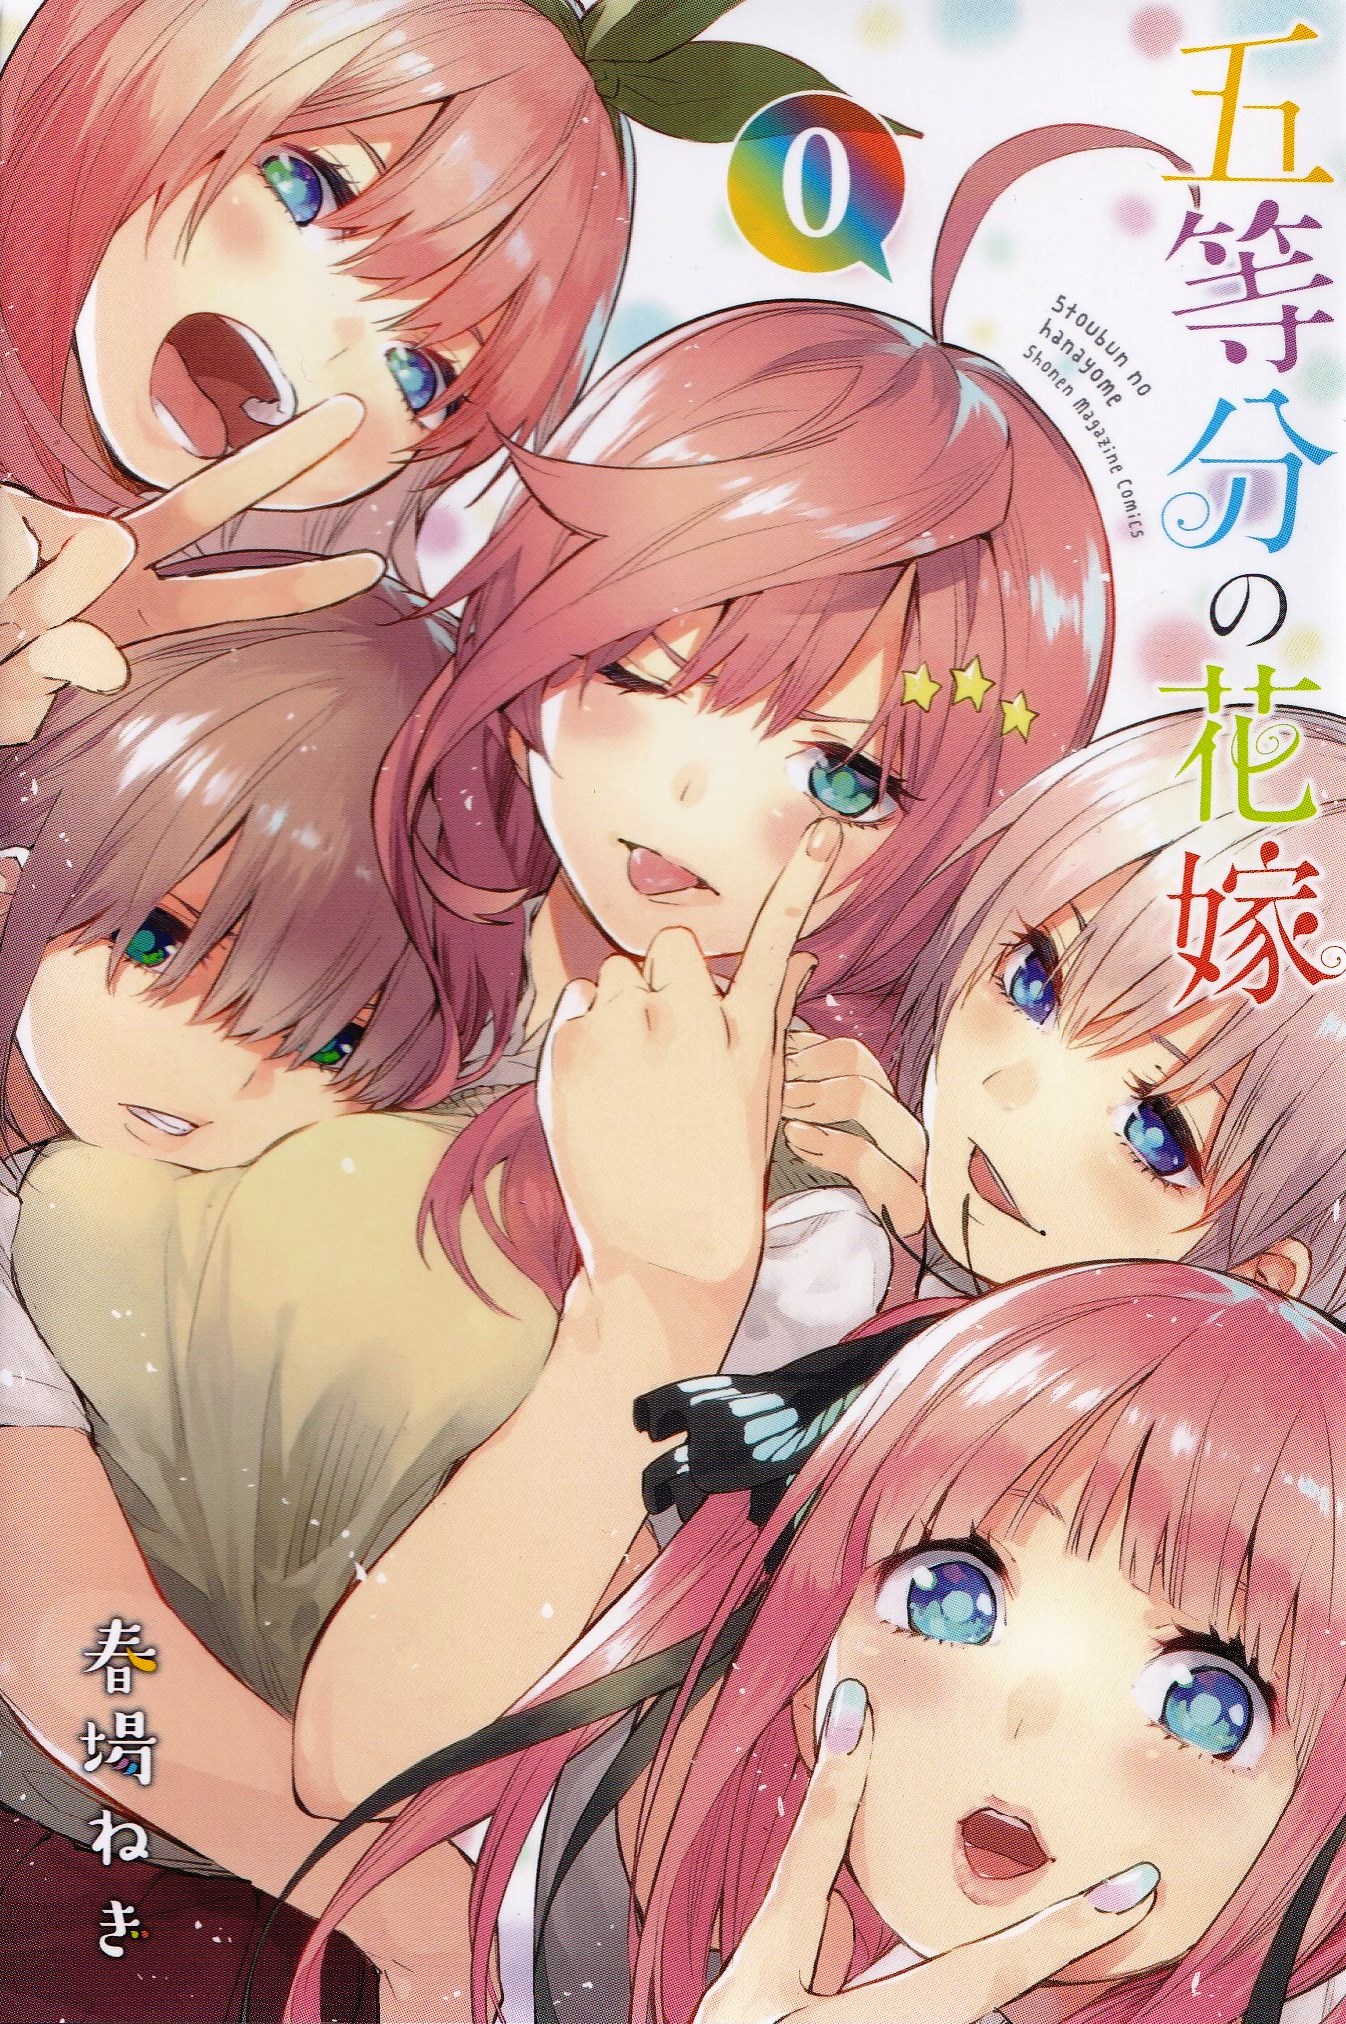 ART] Someone at MangaDex clearly knows who the best quintuplet is (5Toubun  no Hanayome) : r/manga